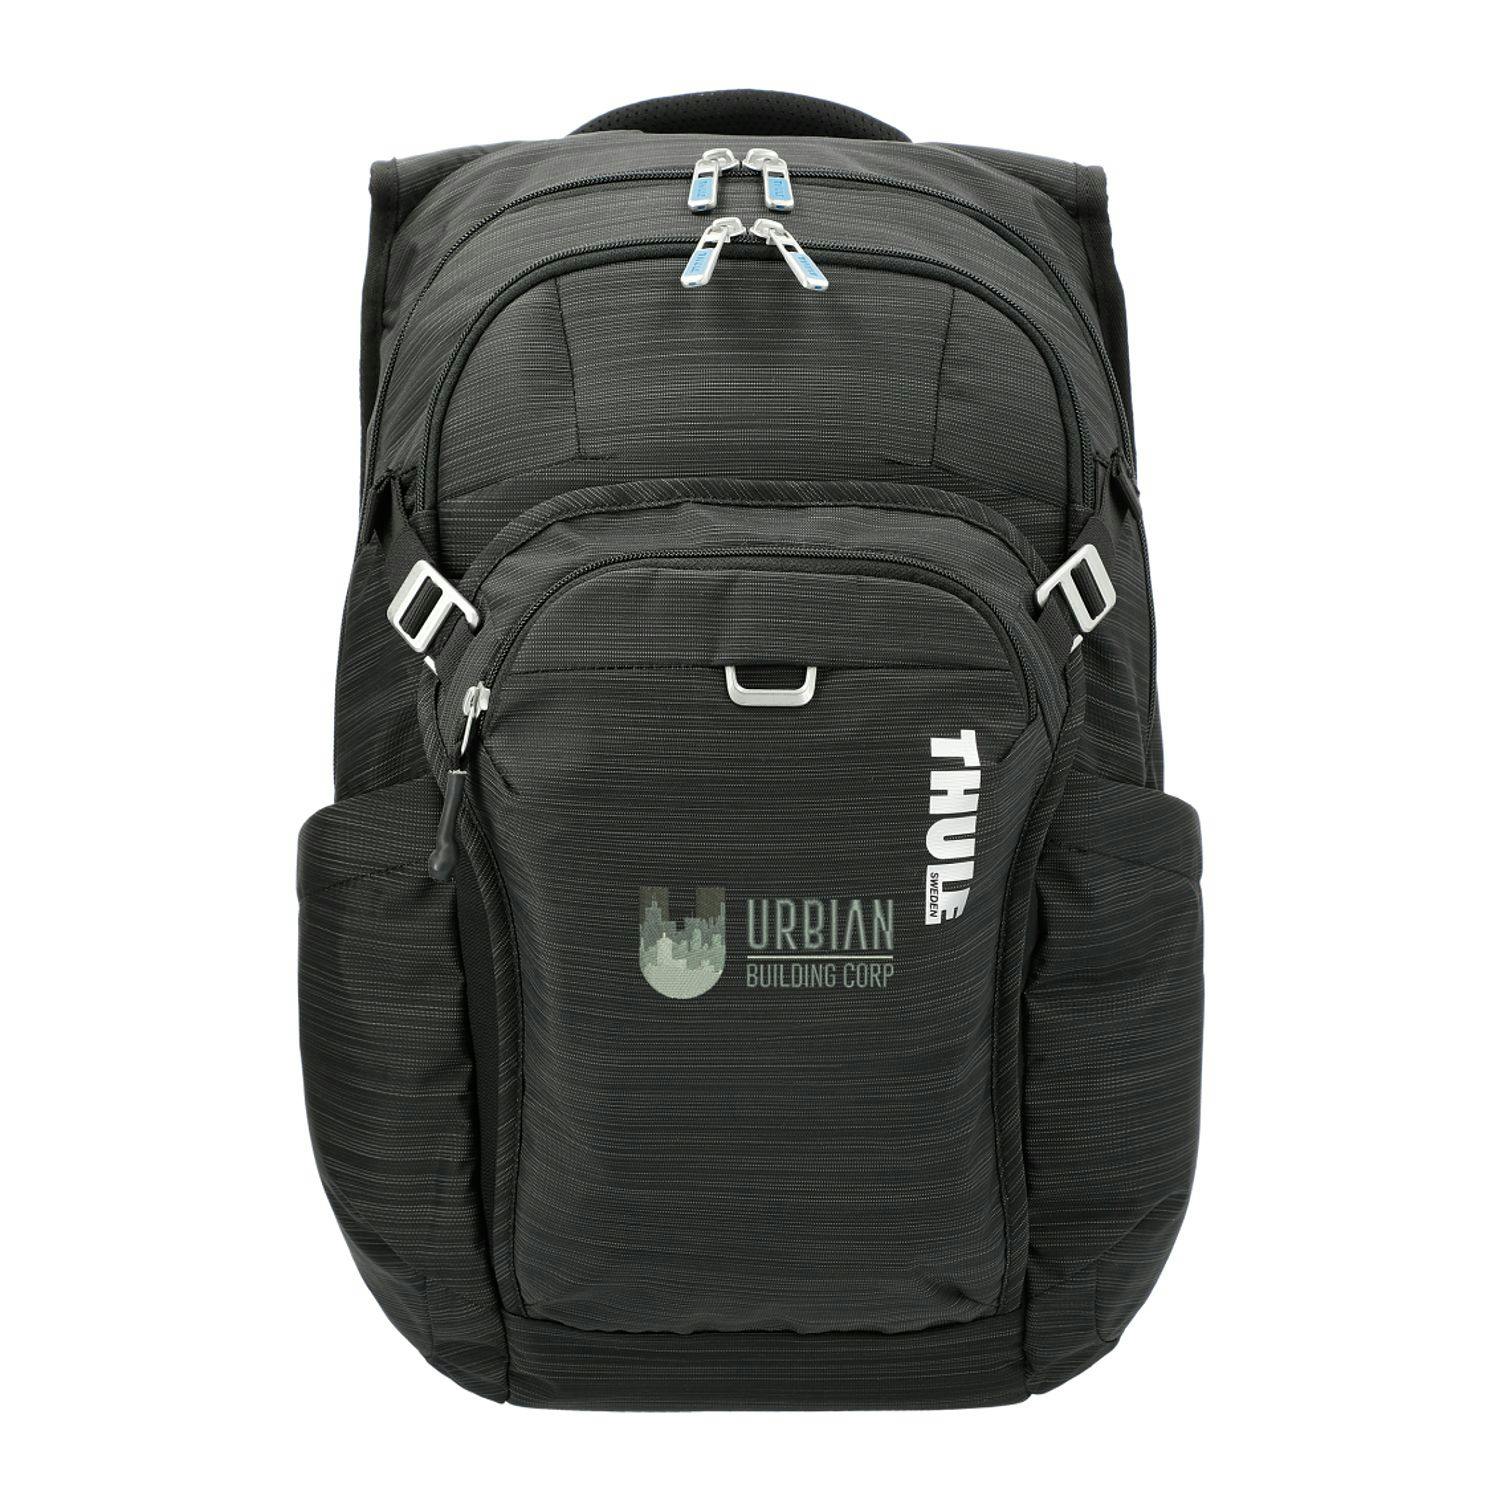 Thule Construct 15" Computer Backpack 24L - additional Image 2